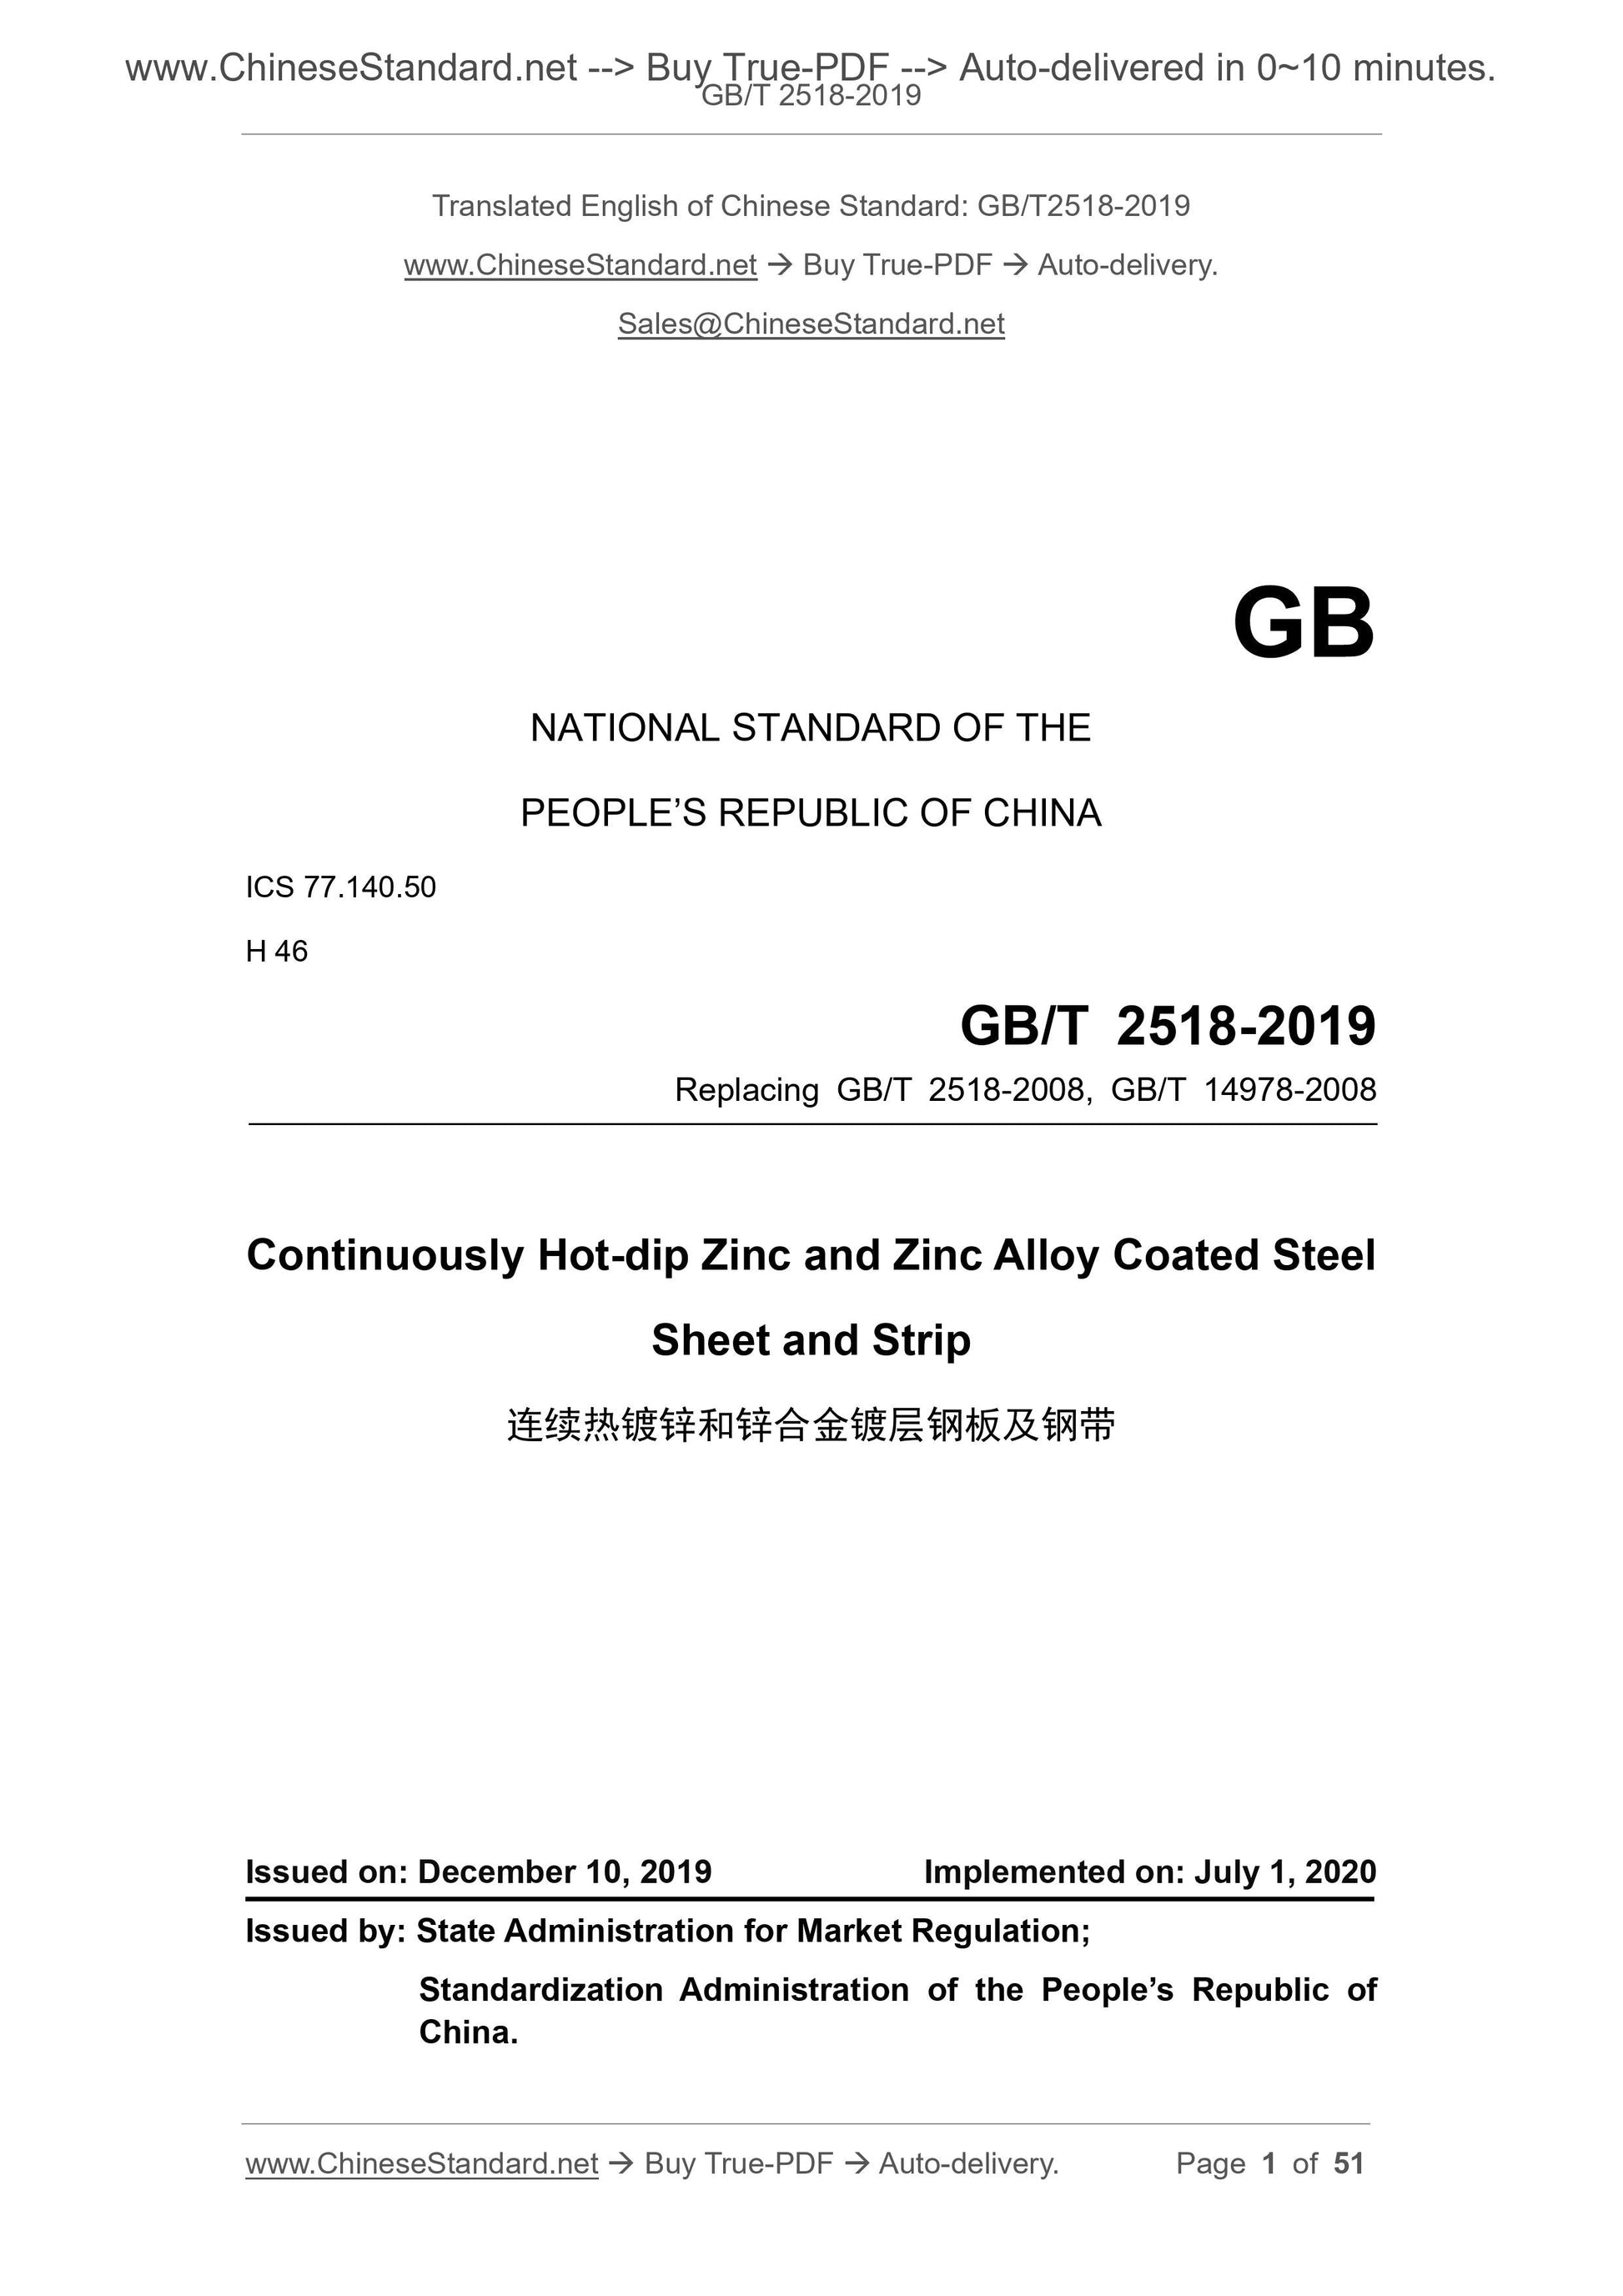 GB/T 2518-2019 Page 1